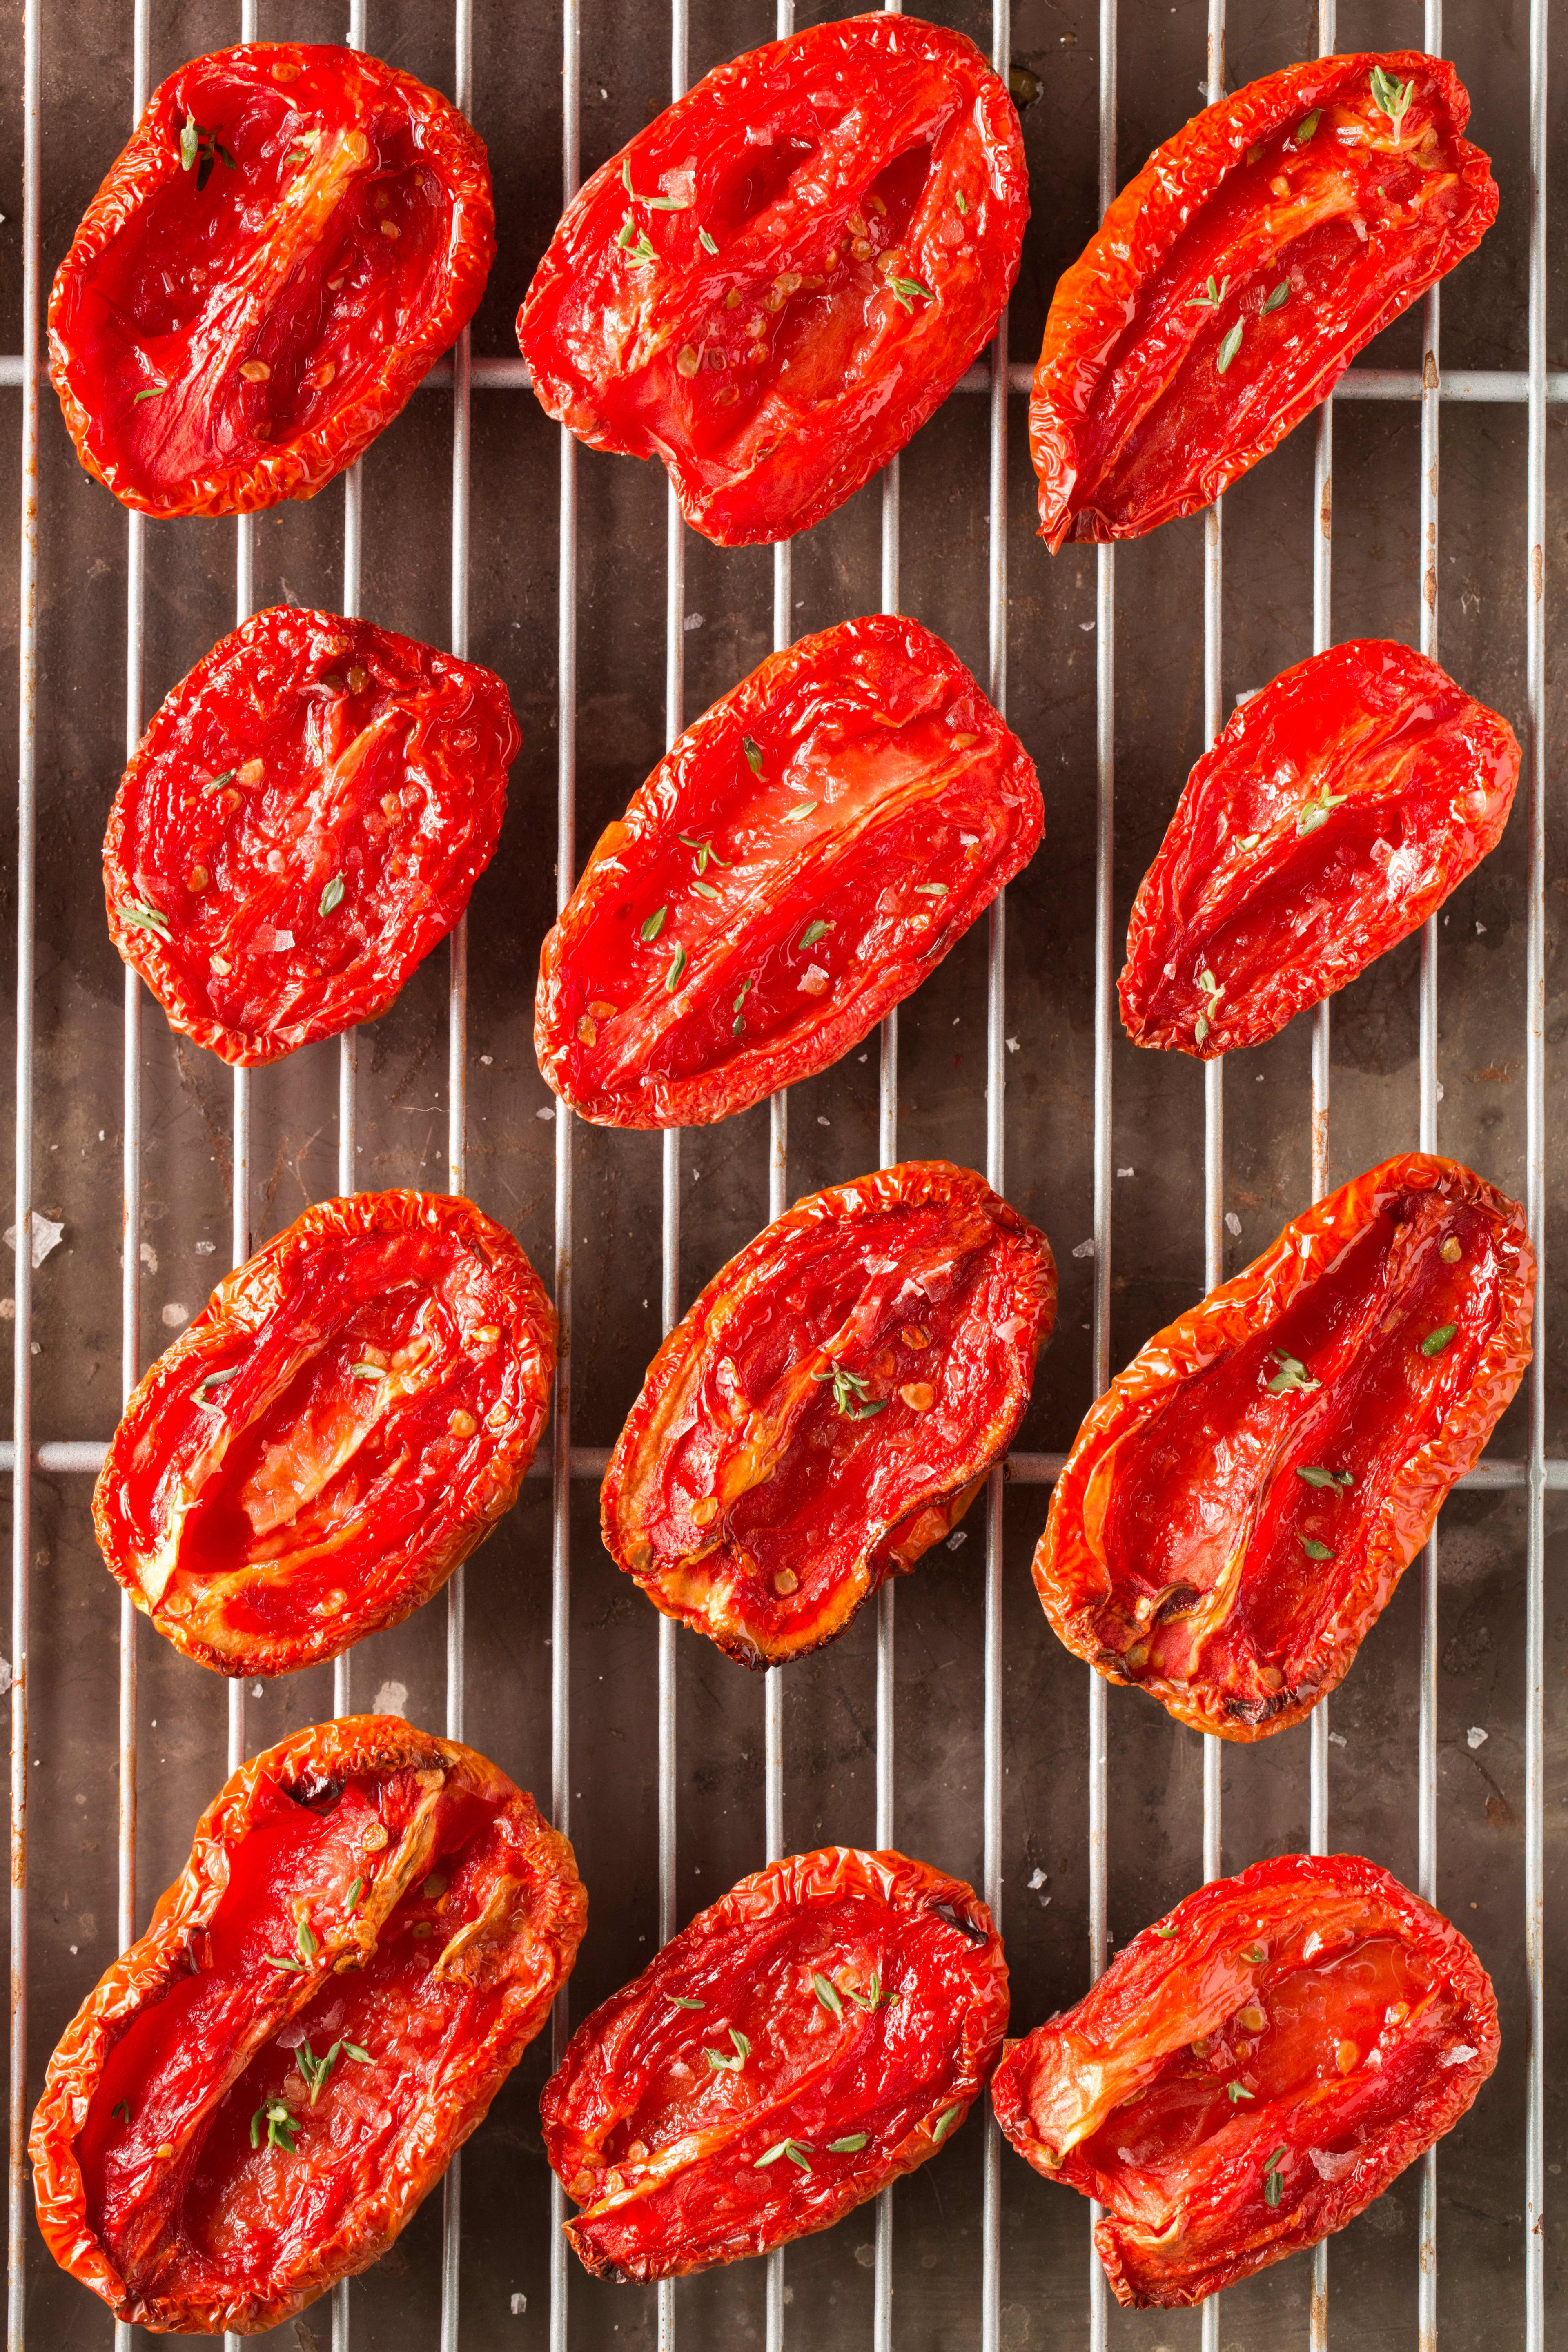 Drying Tomatoes - How To Sun Dry Tomatoes